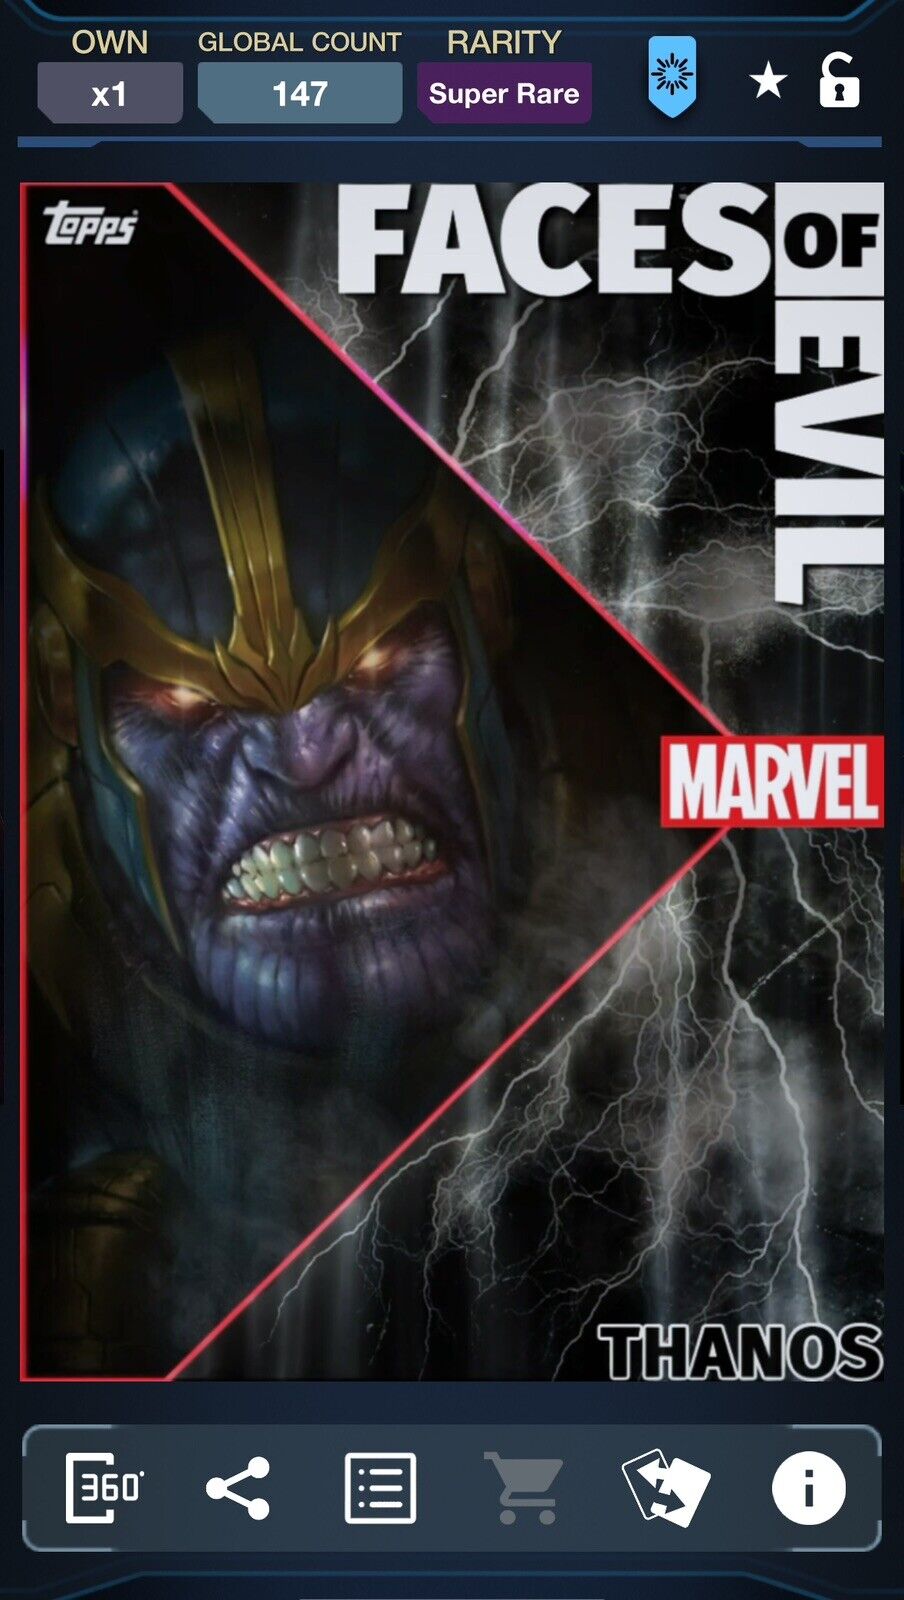 Topps Marvel Collect 2019 Faces Of Evil Thanos Overall Award Motion SR Digital 